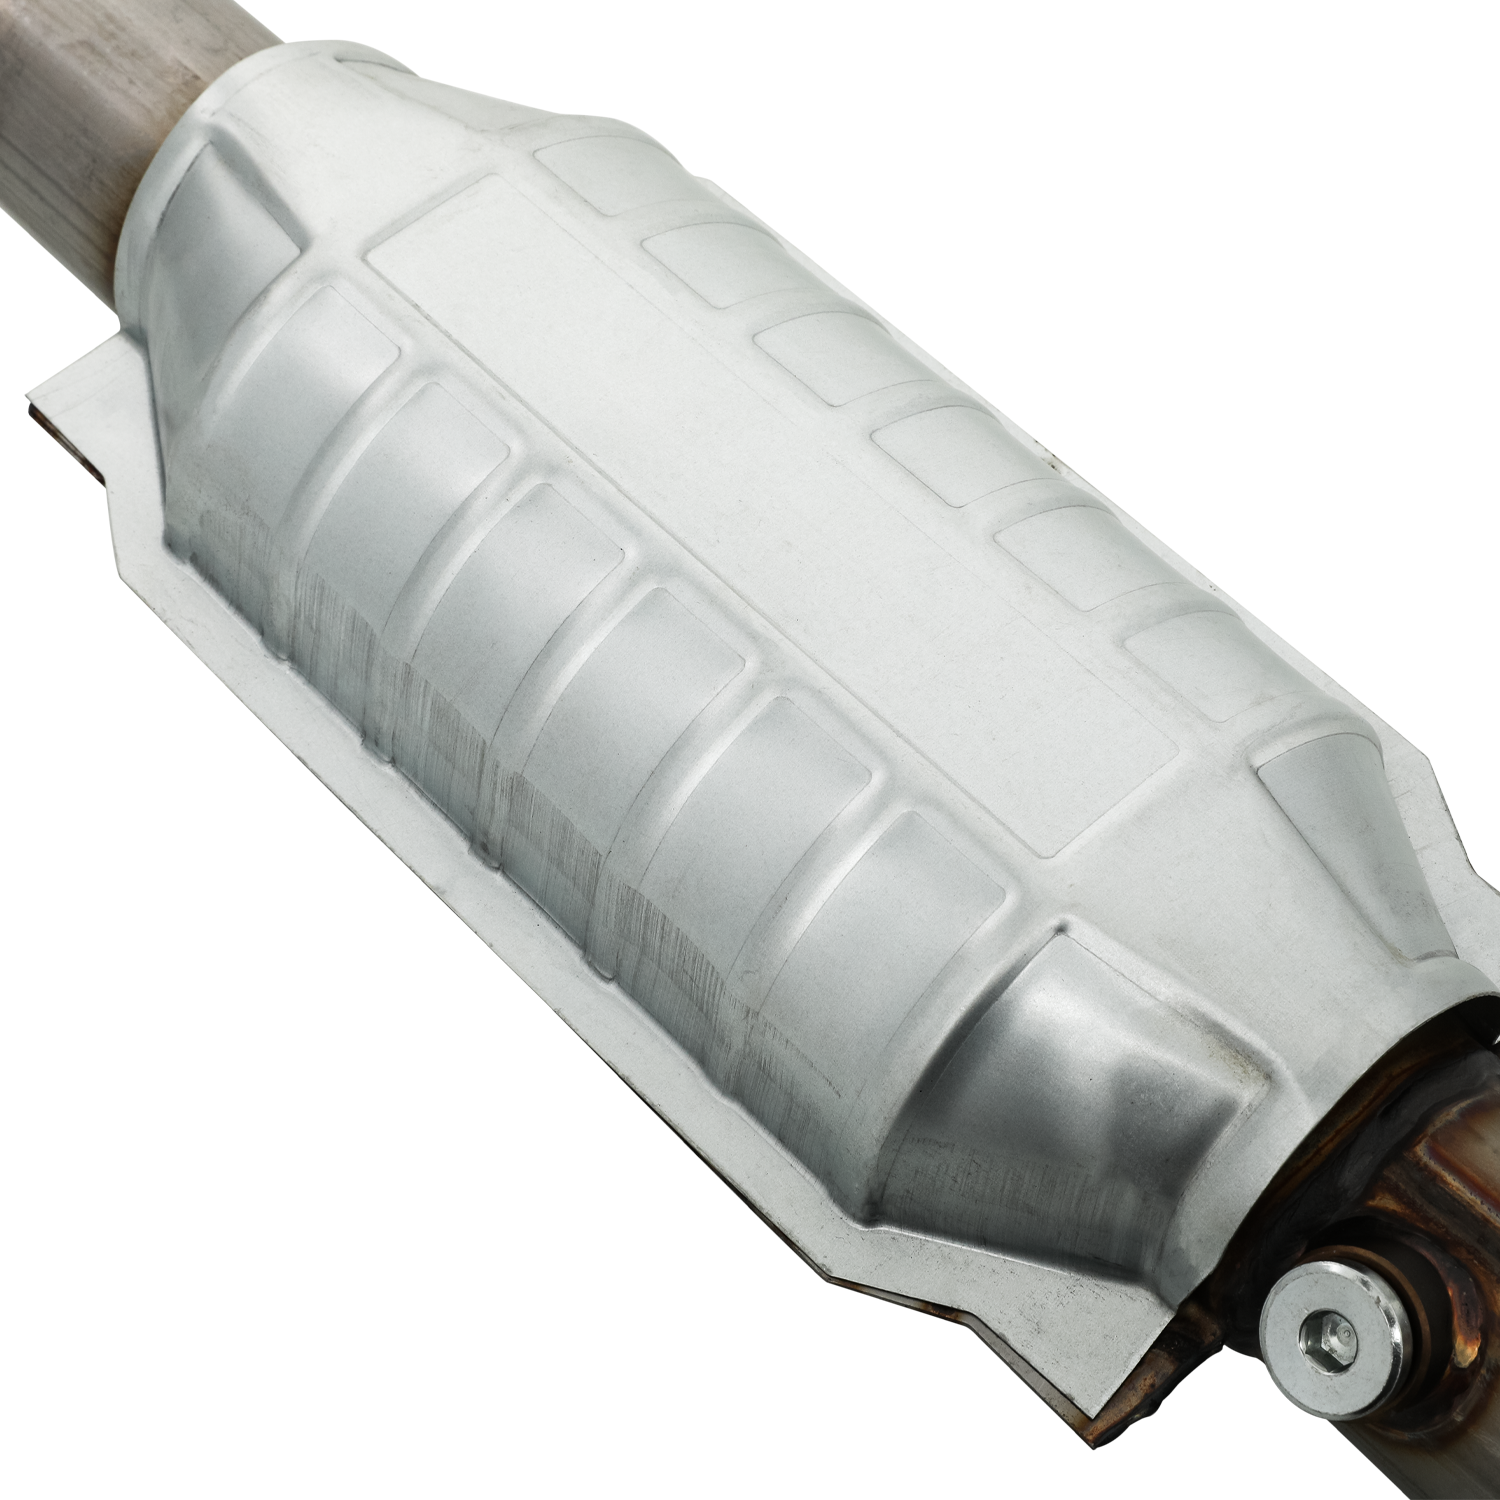 OE Replacement Catalytic Converter<br>96-00 Jeep Cherokee, 93-98 Grand Cherokee 4.0L